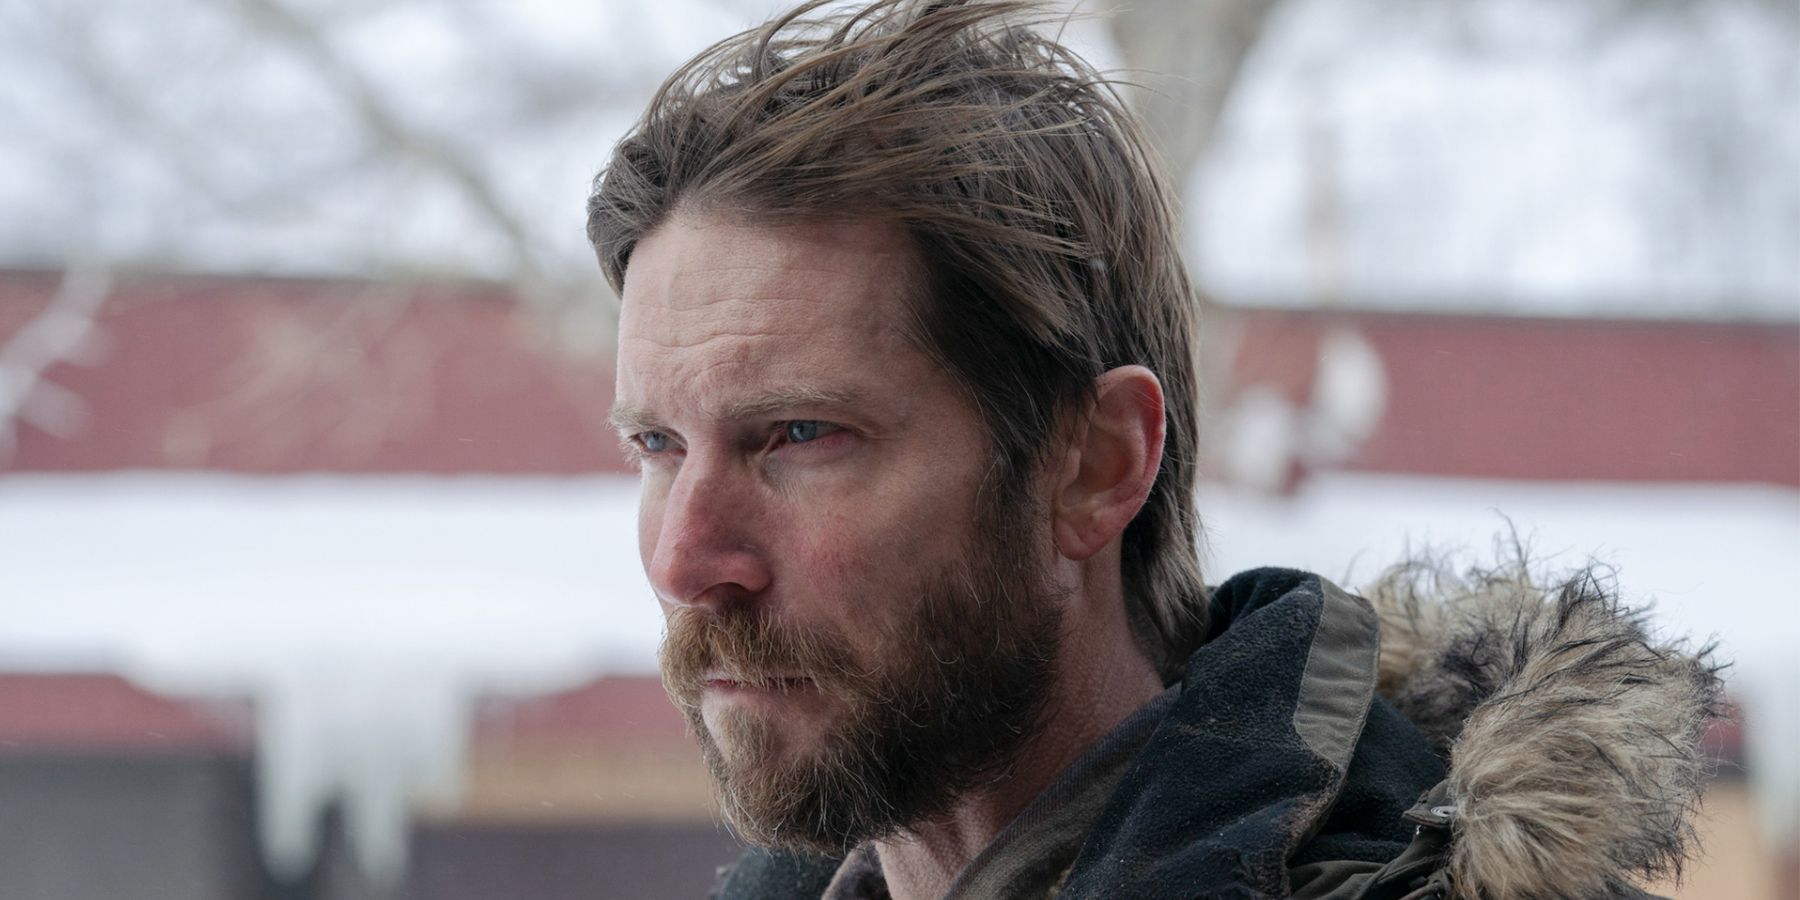 The Last of Us season 1 episode 8 James played by Troy Baker outside in the snow